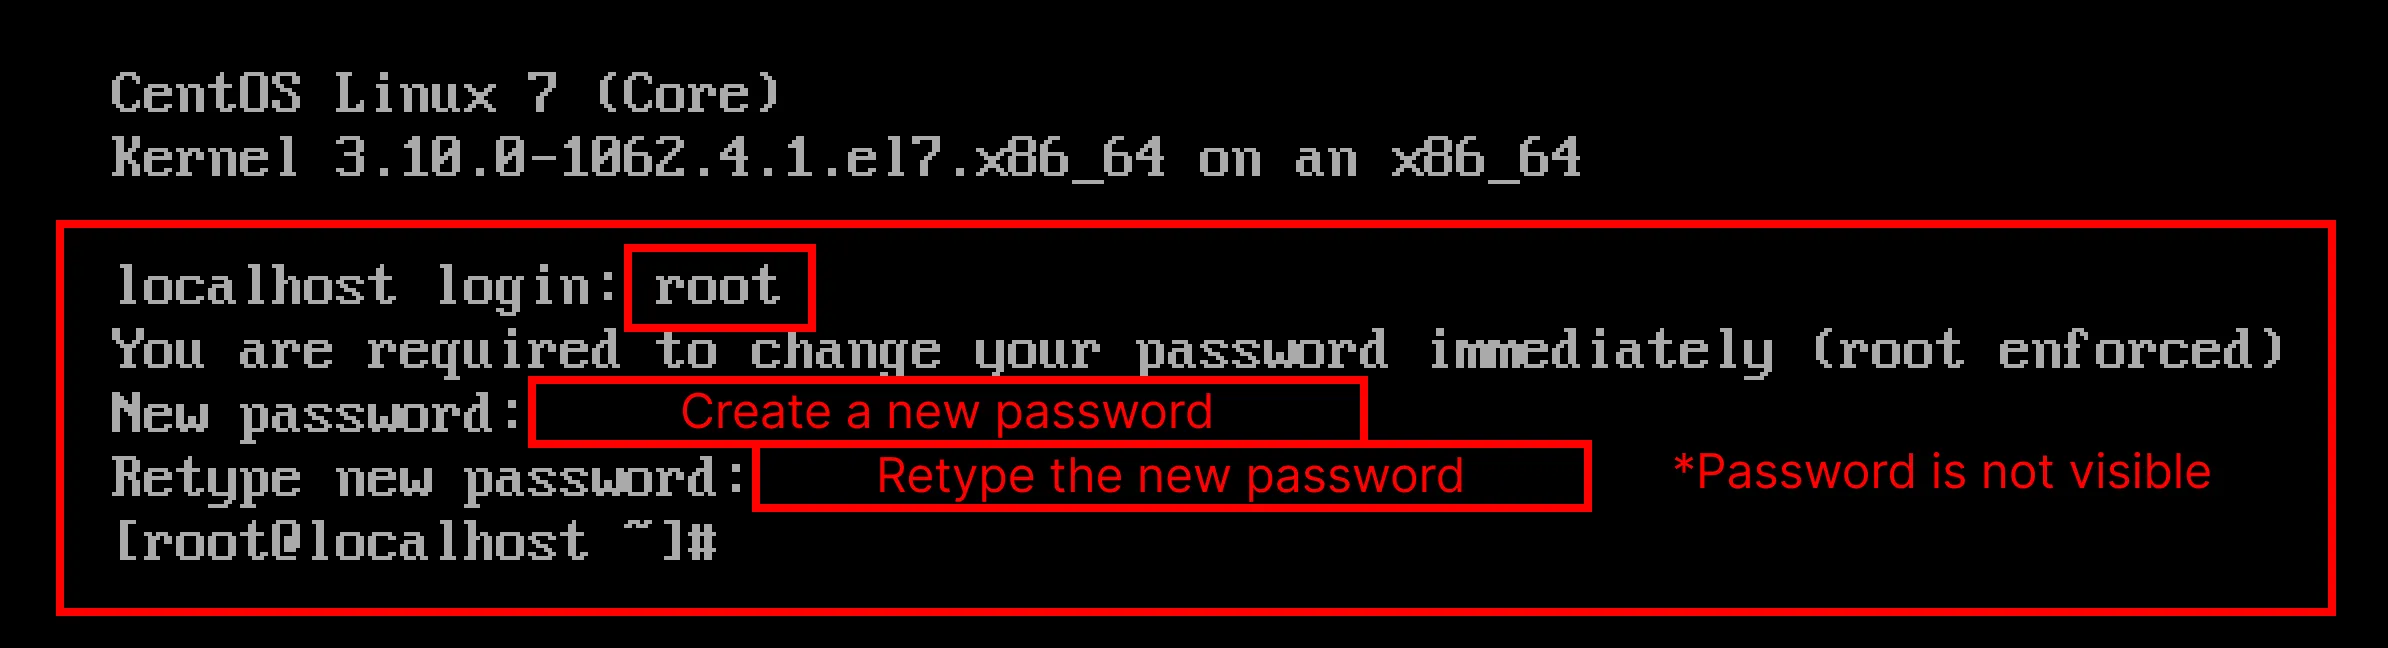 Login with the root user and create a new password